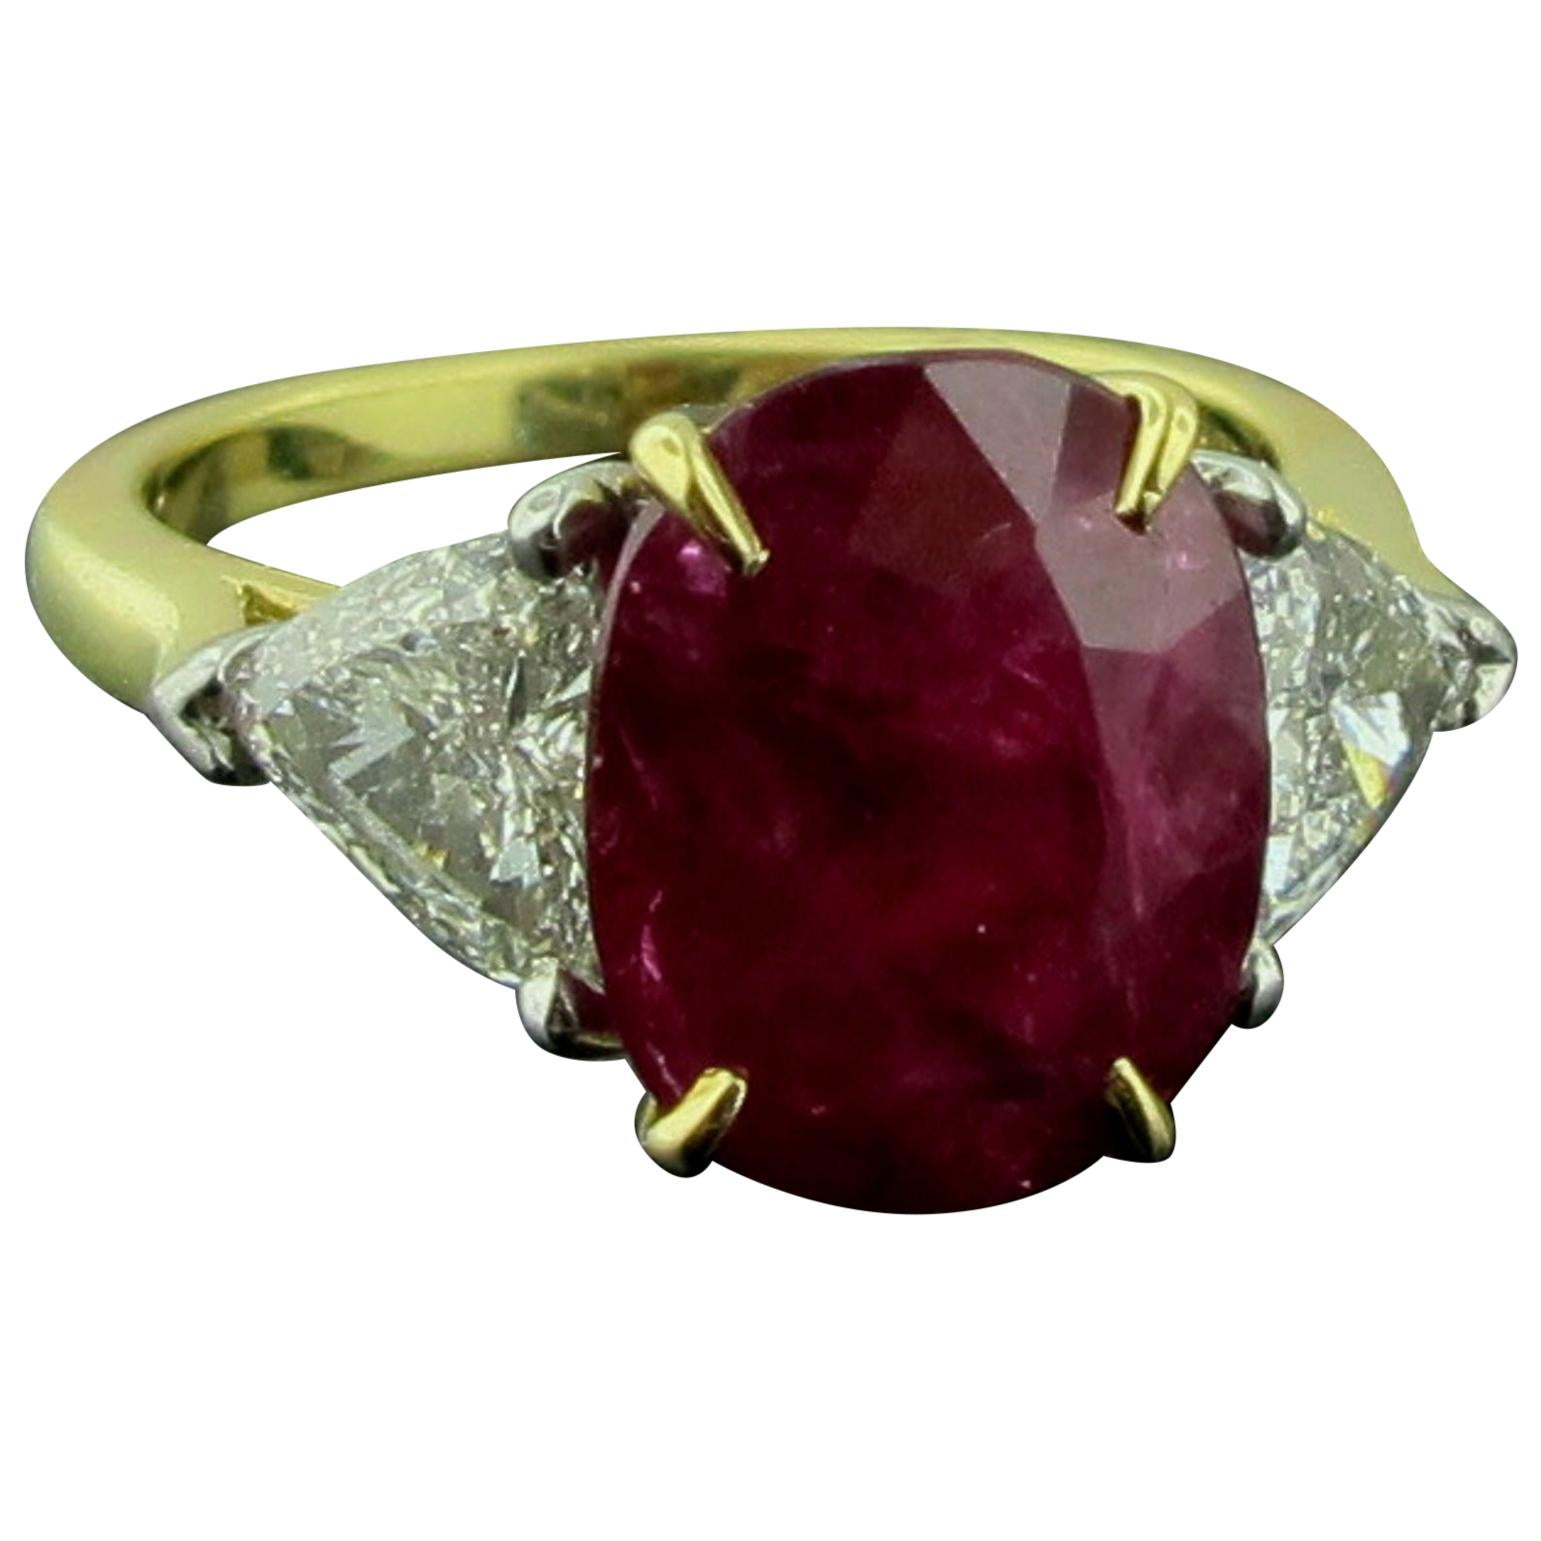 6.22 Carat Ruby and Diamond Ring in 18 Karat Yellow Gold and Platinum